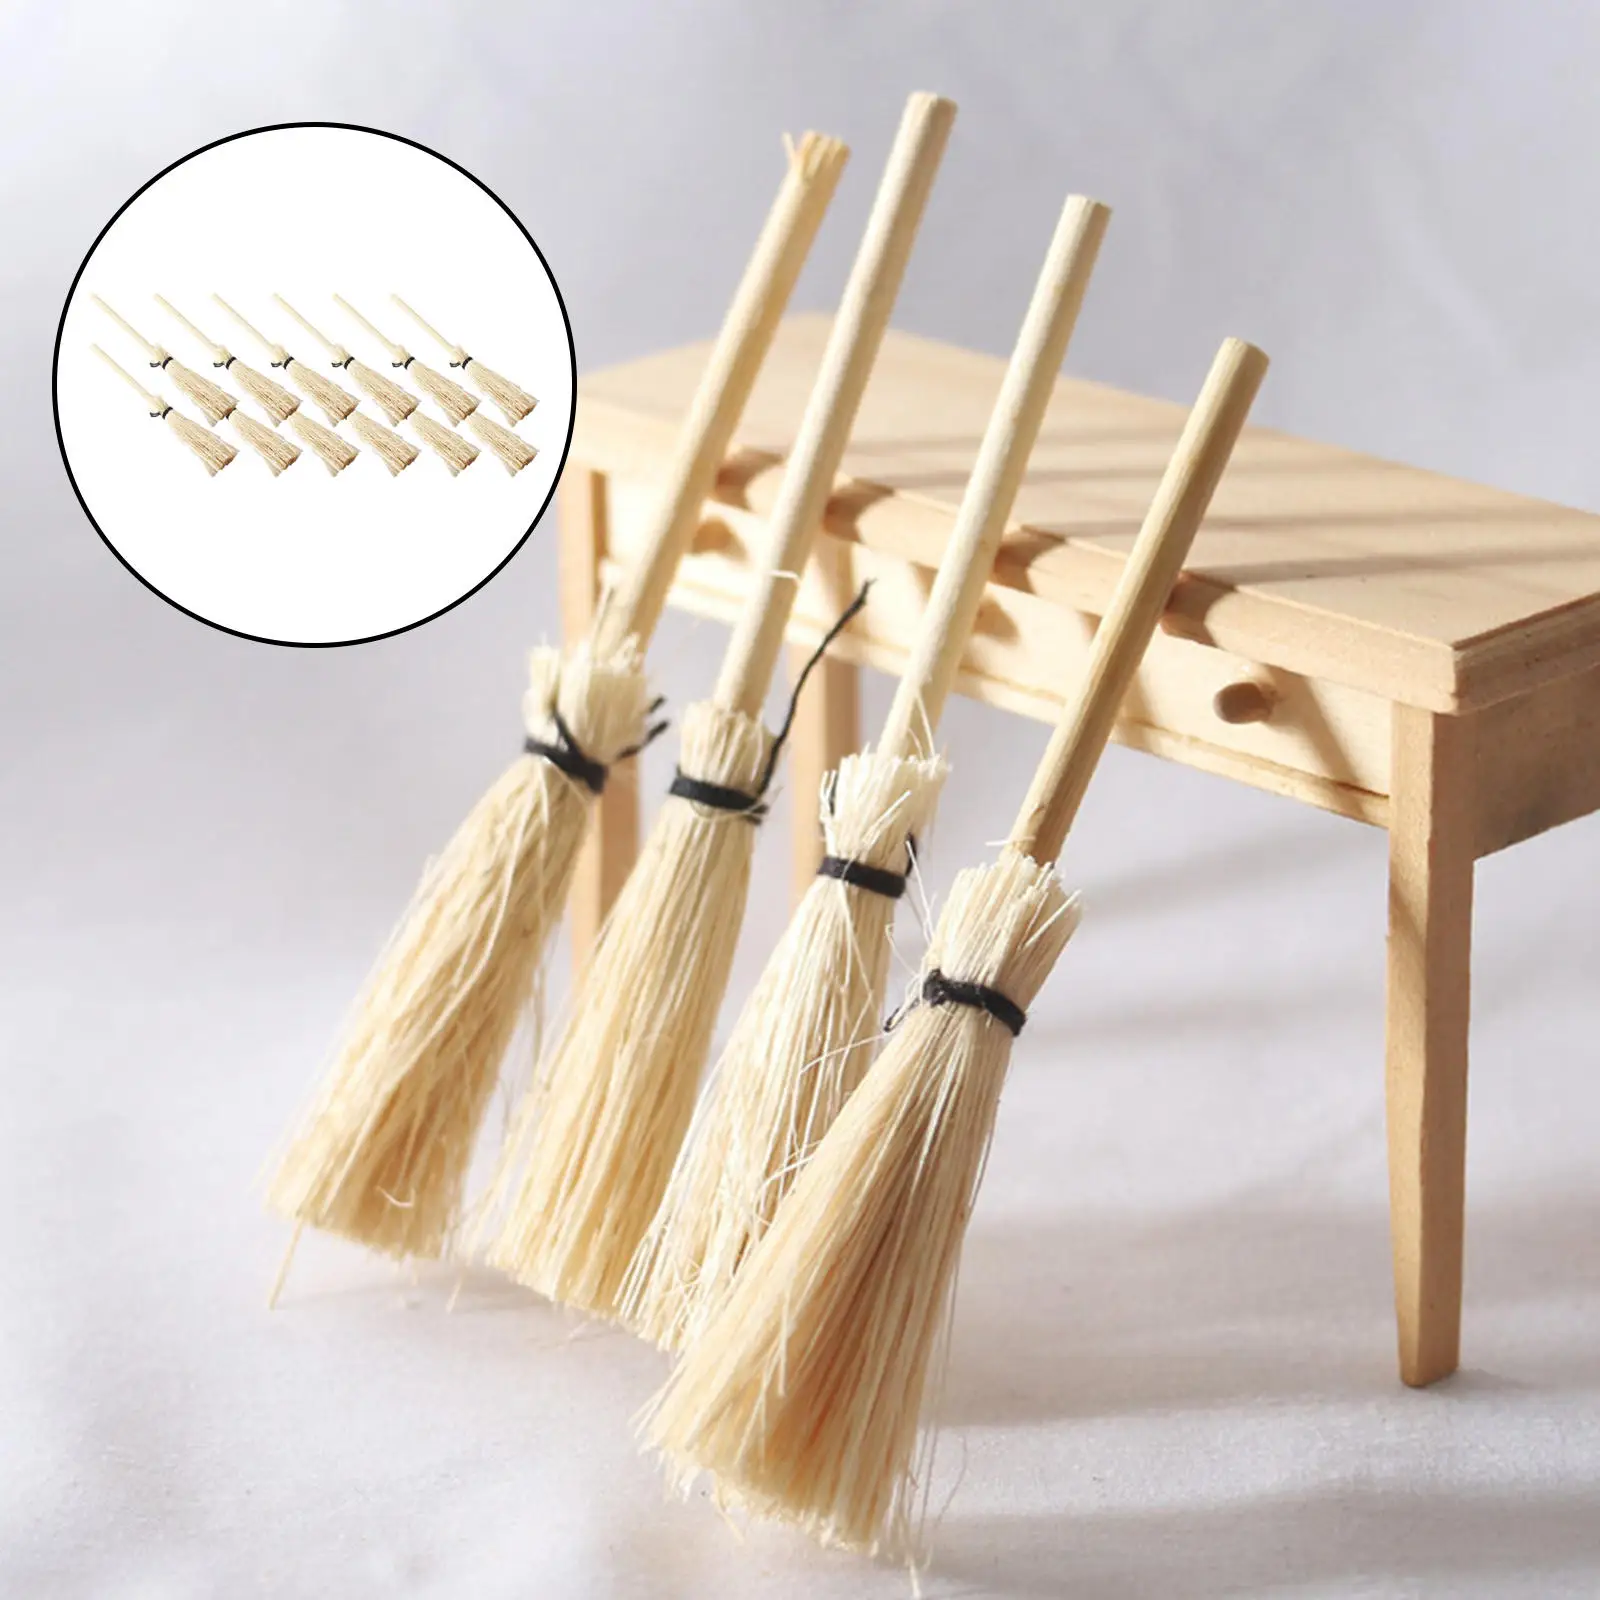 12 Pieces Dollhouse Miniature Broom Mini Broom DIY Crafts Playset for Dollhouse Costume Cosplay Party Decoration Accessories